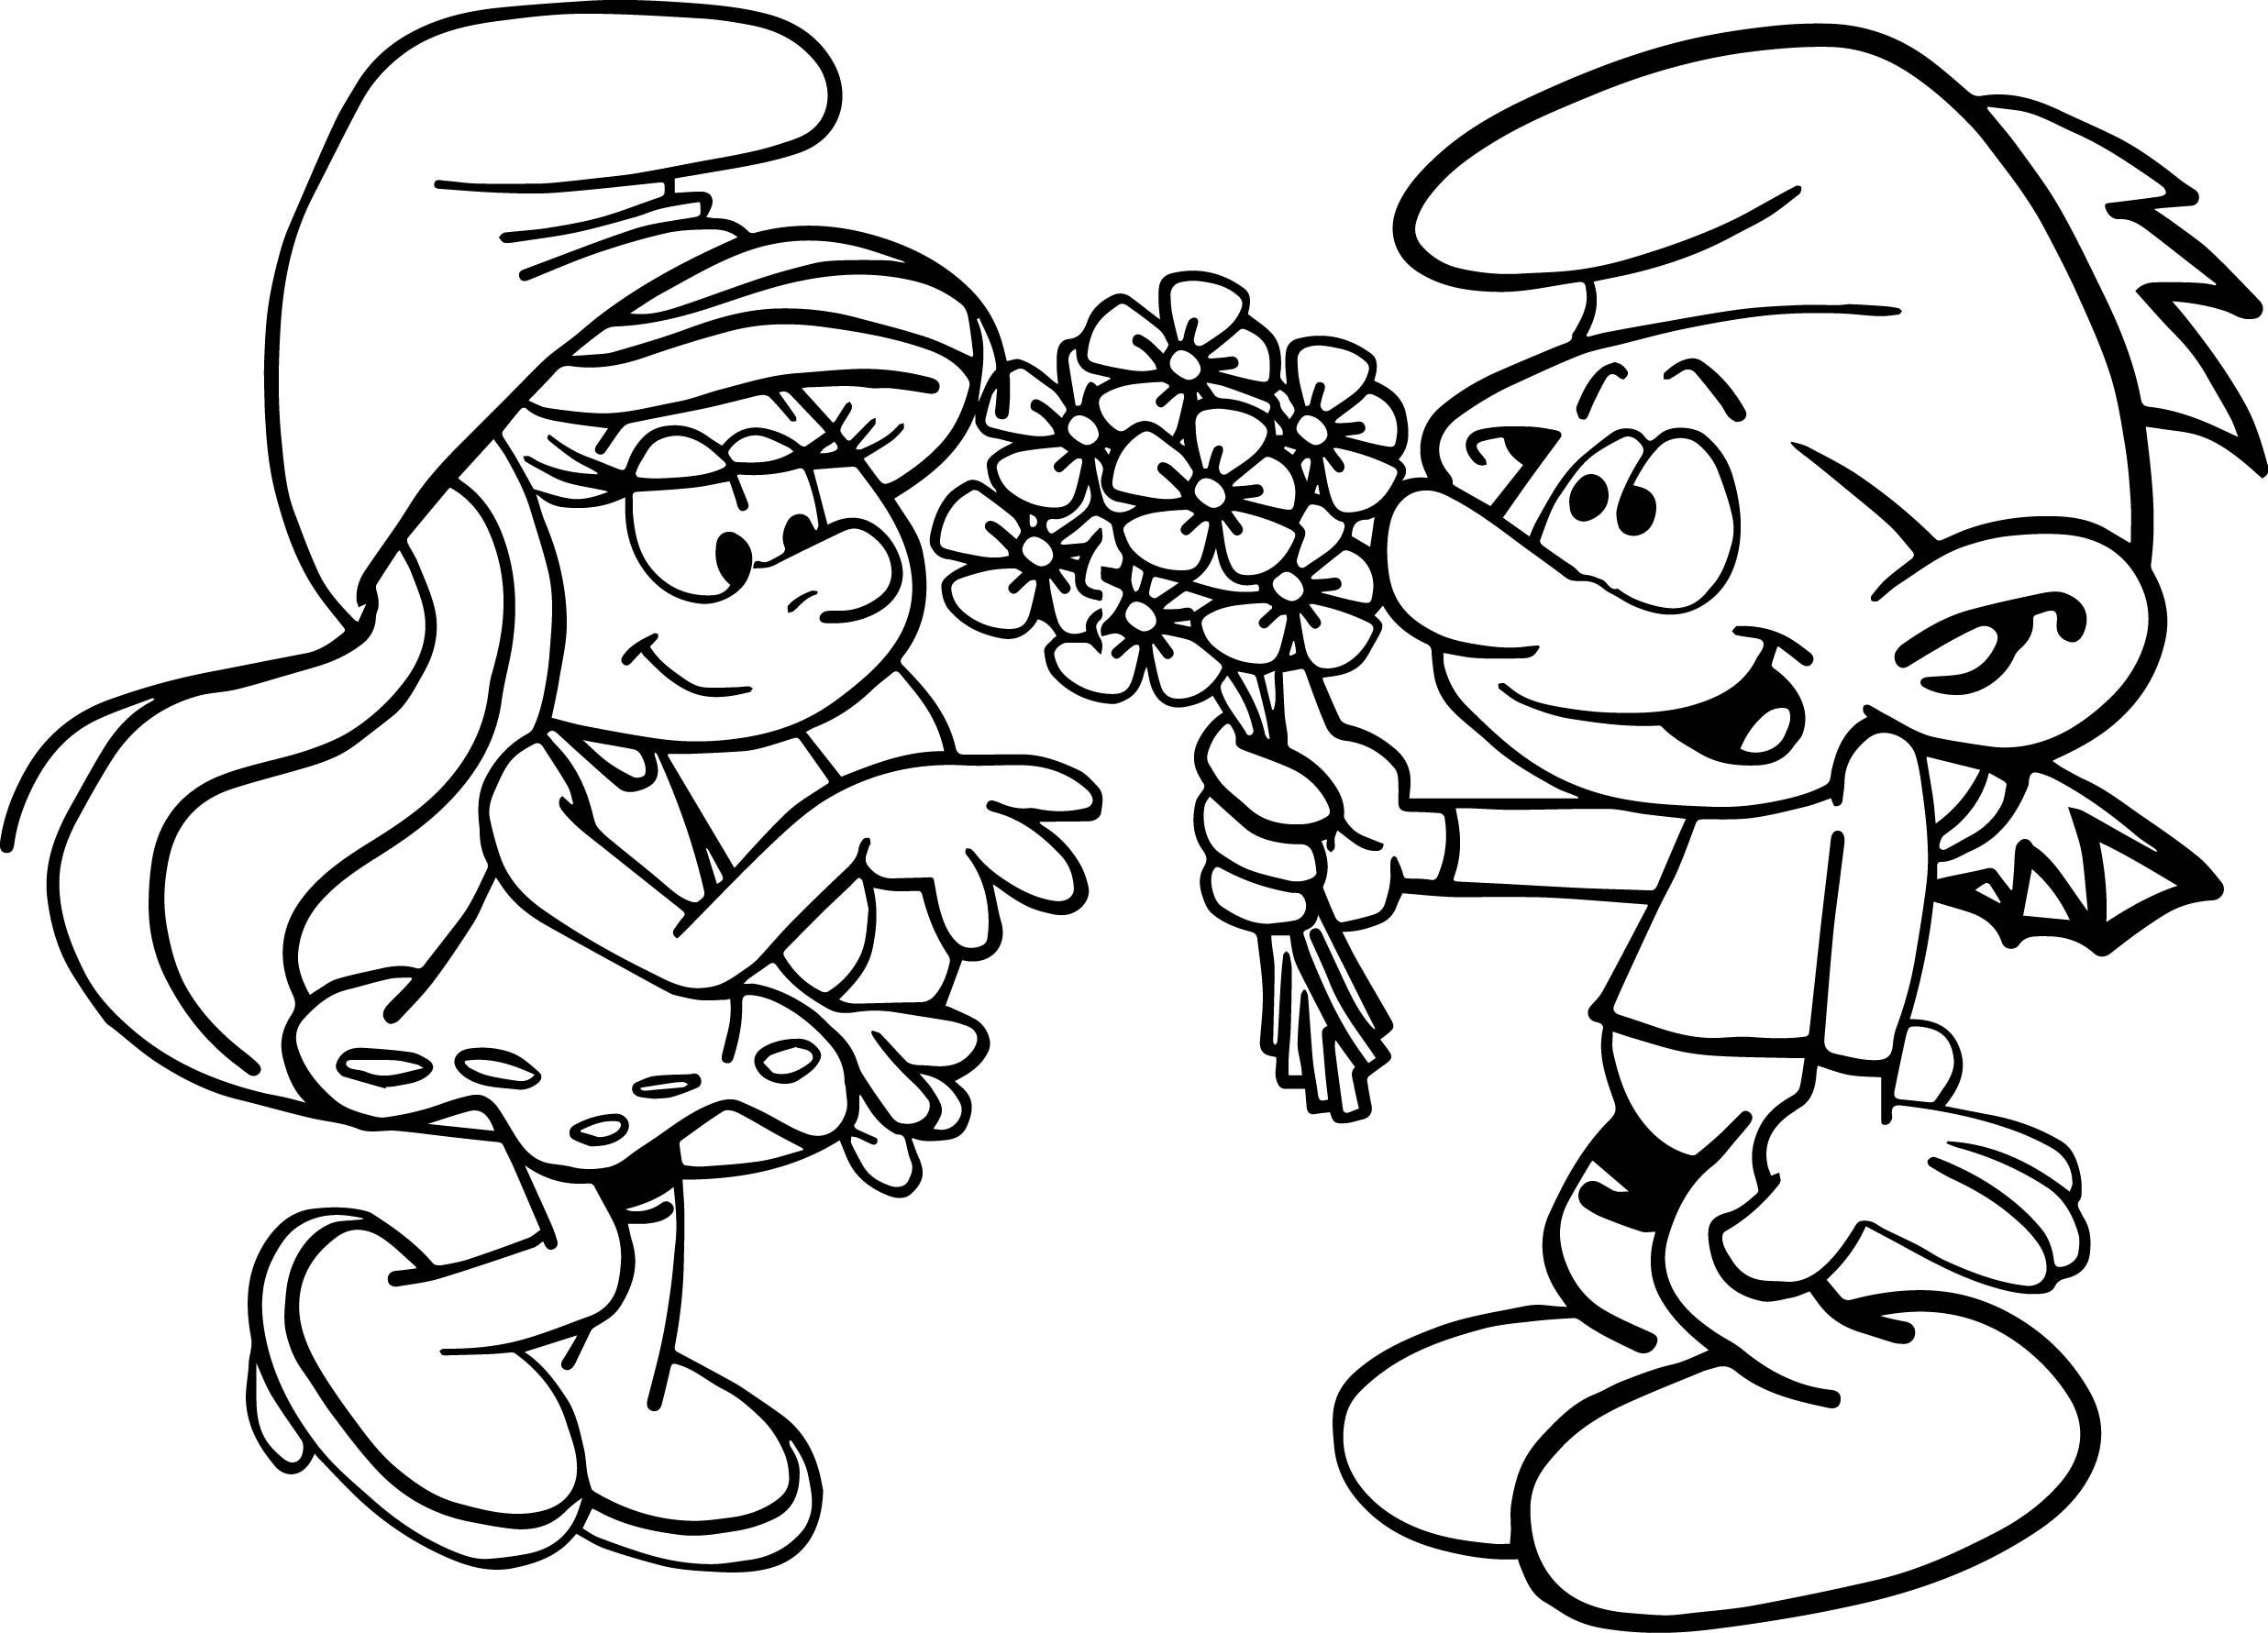 the-smurfs-coloring-pages-at-getcolorings-free-printable-colorings-pages-to-print-and-color